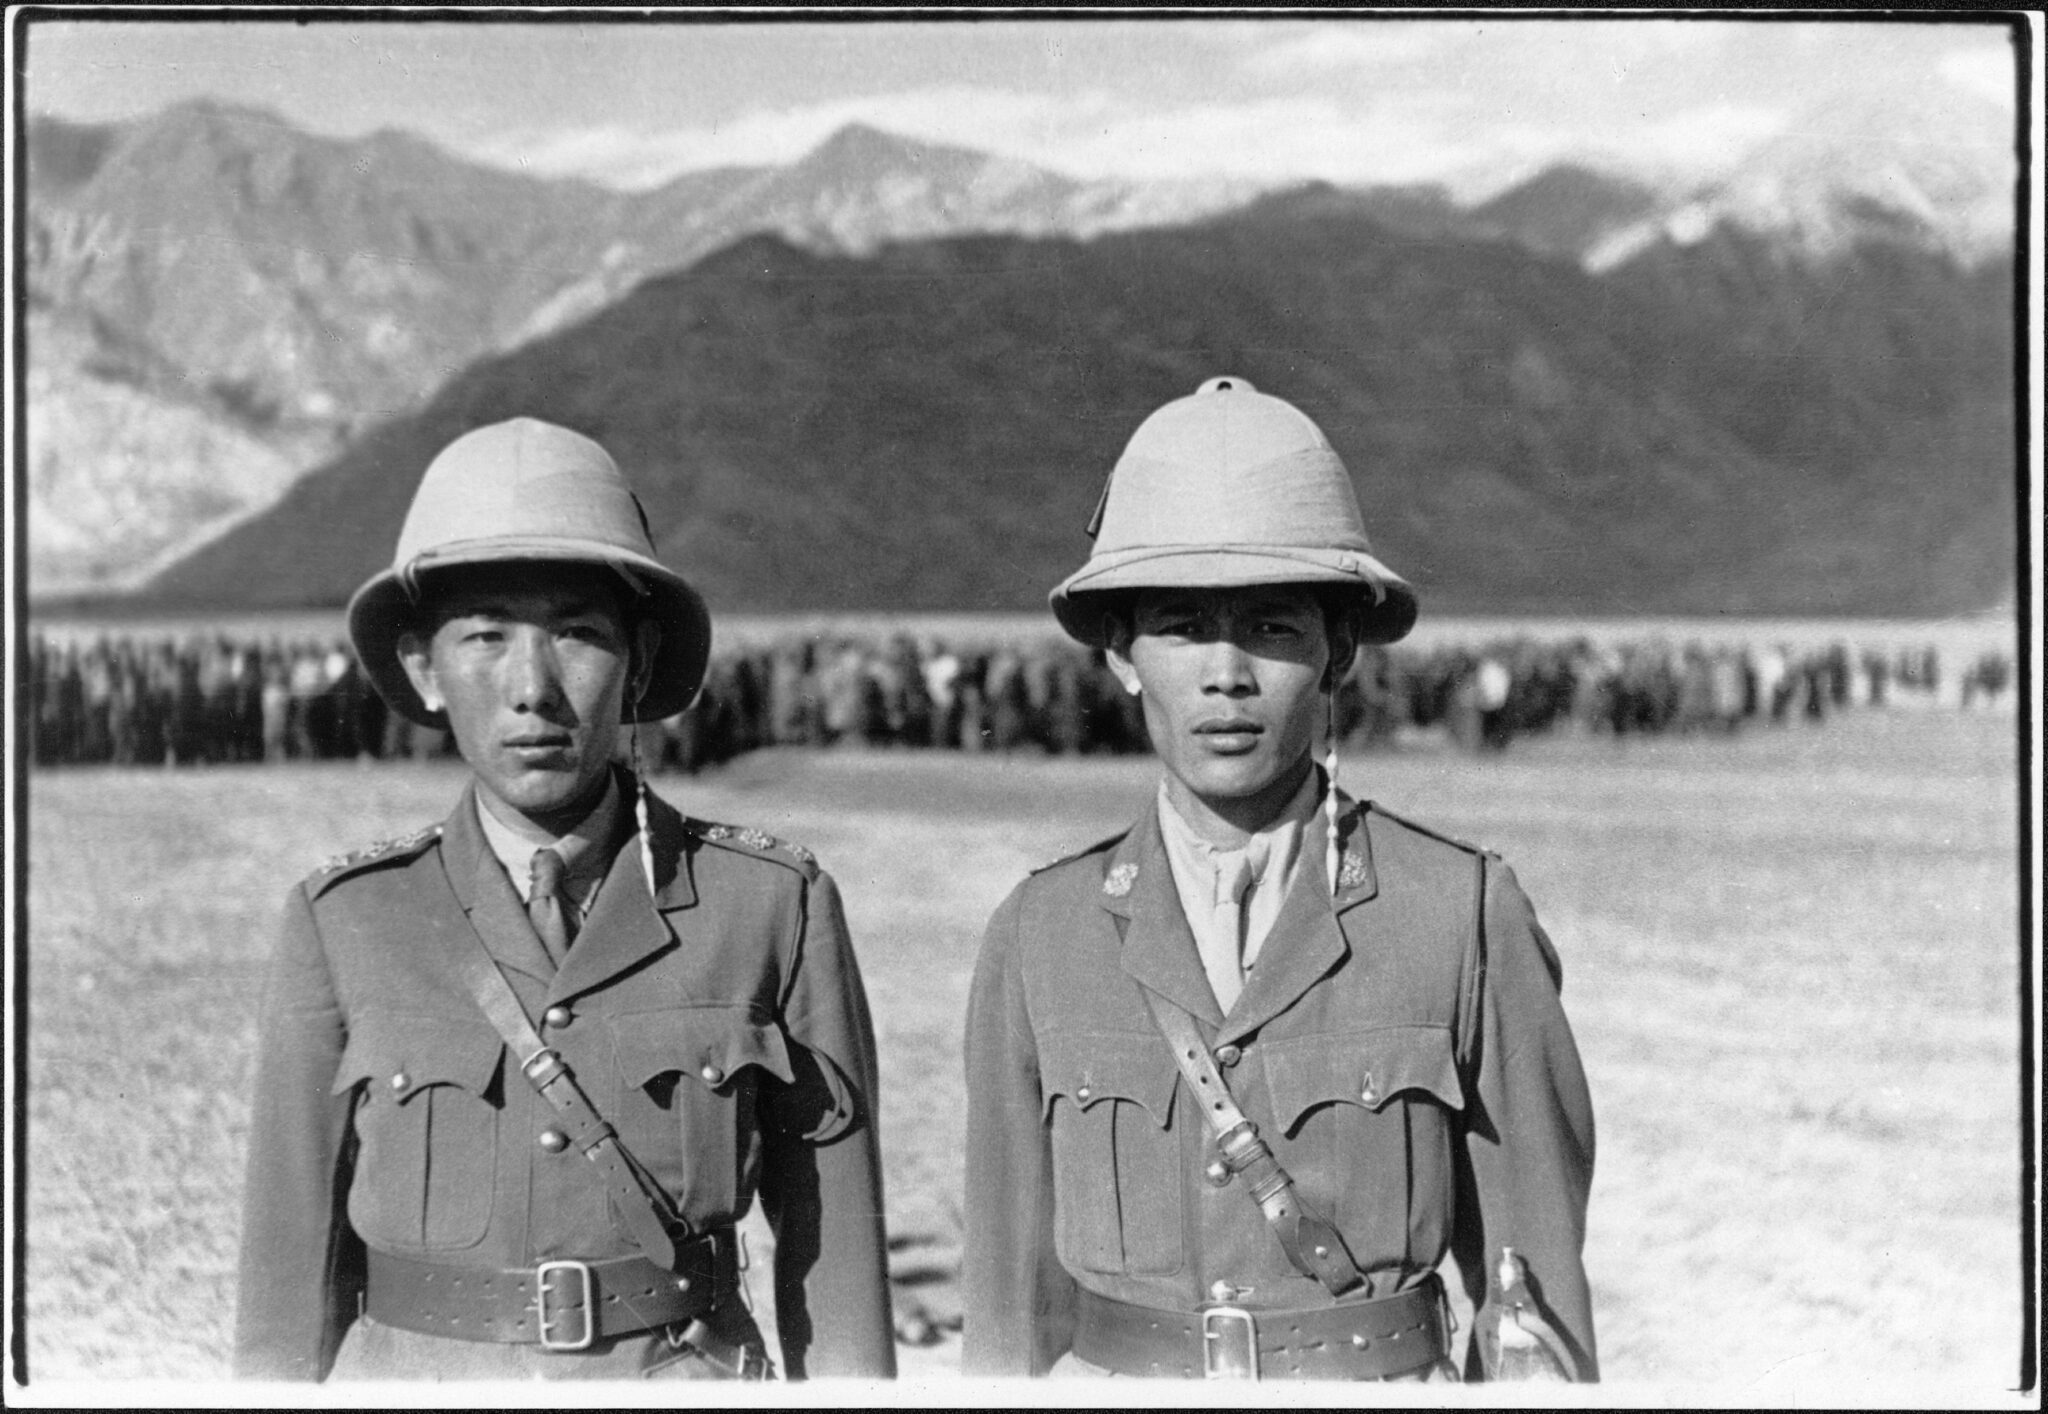 Black and white photograph of two men in military uniform and helmets posing side by side